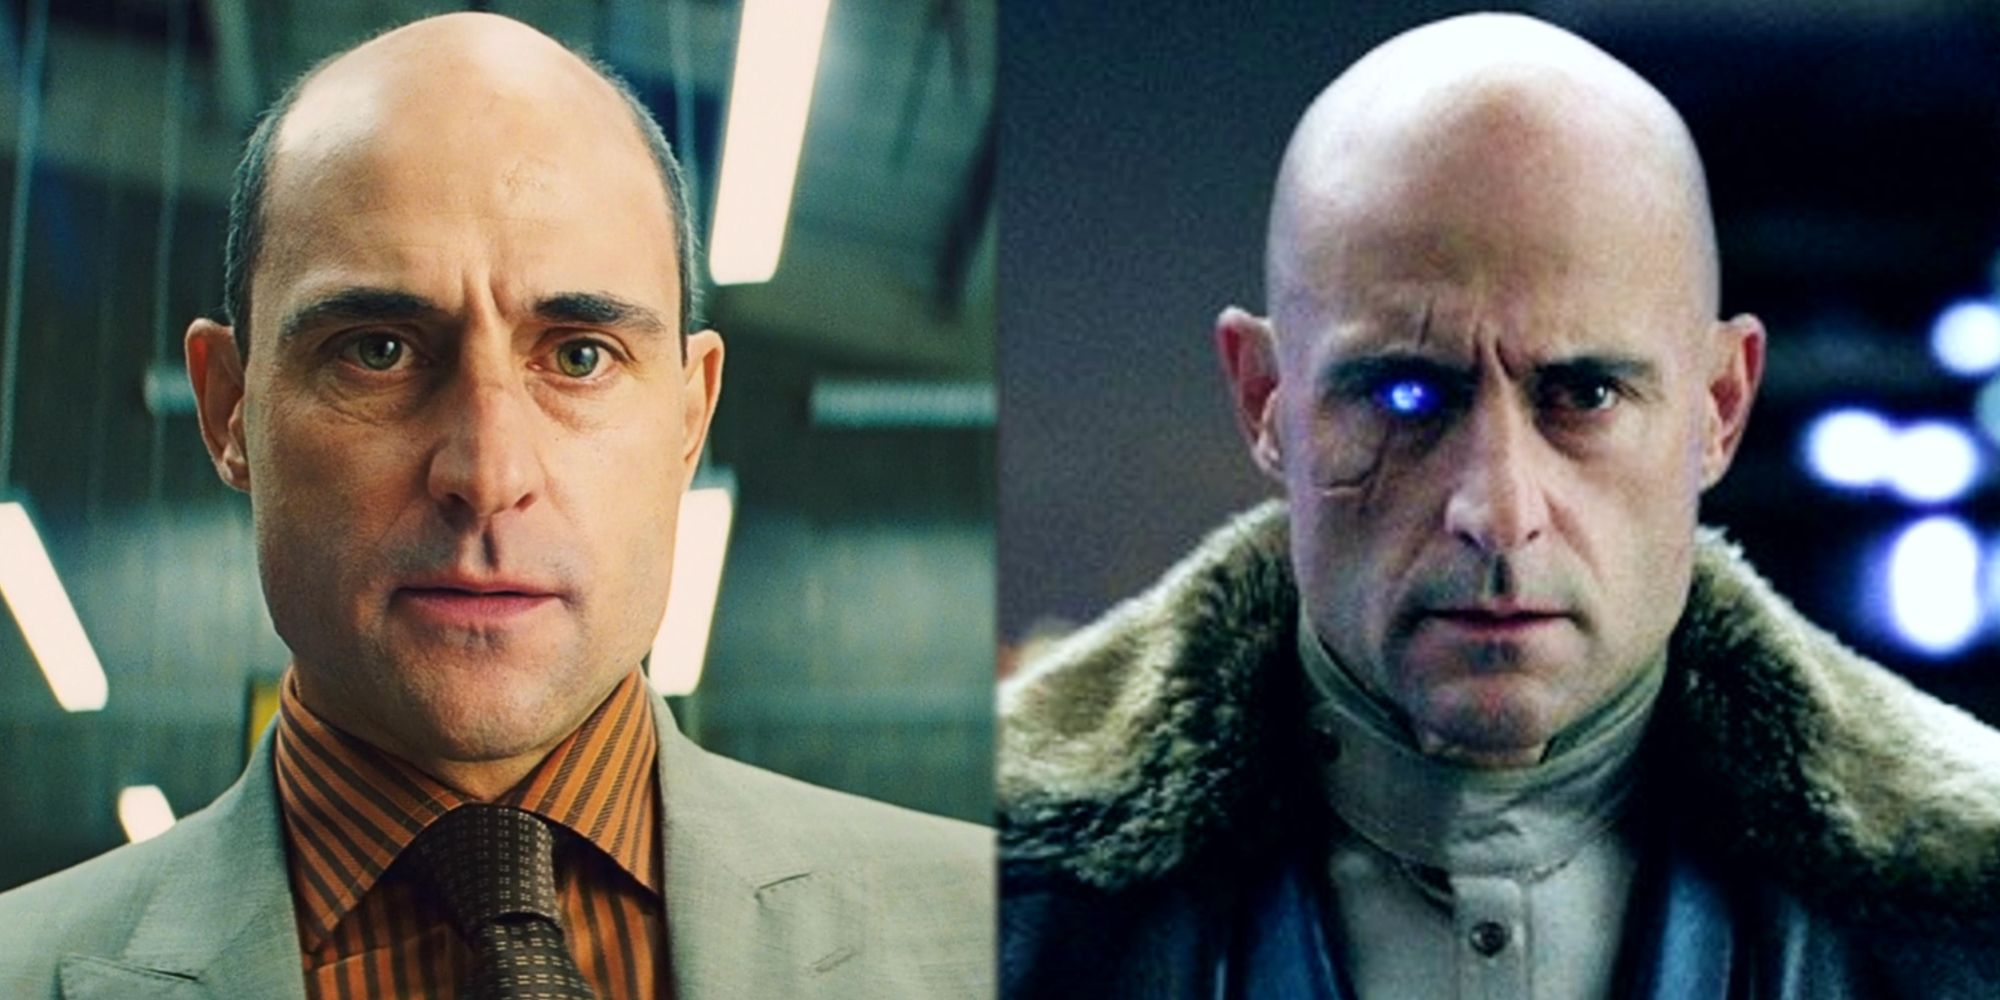 Mark Strong as Frank D'Amico in Kick-Ass and Doctor Sivana in Shazam